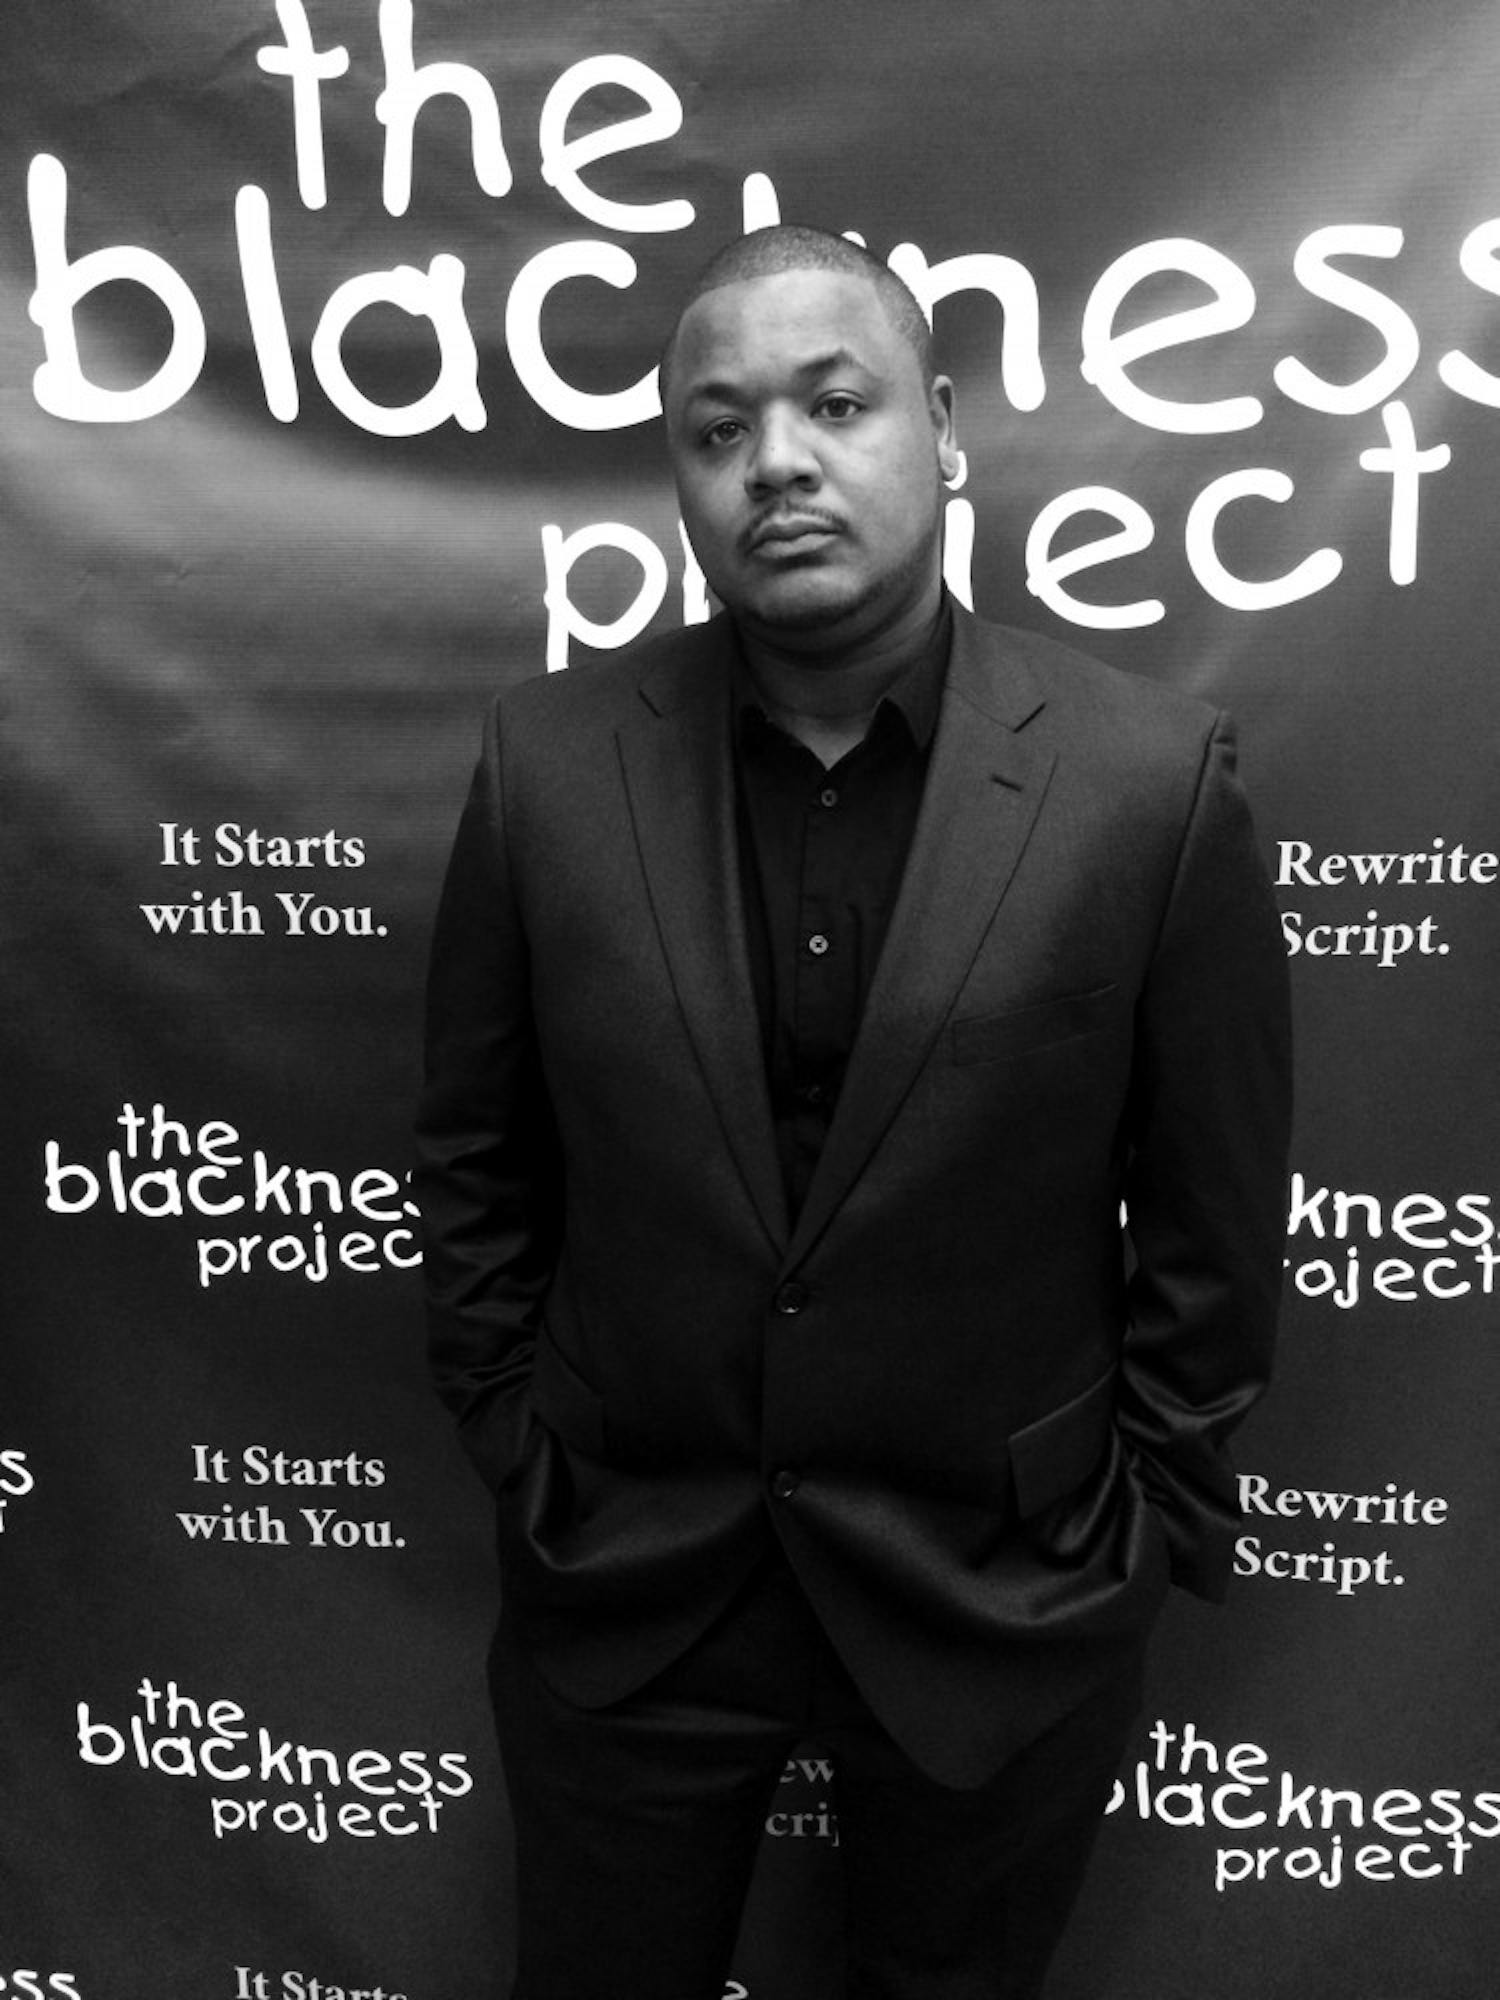 Korey Green, a local filmmaker and head of Black Rose Production House, is gearing up for the release of his film “The Blackness Project.” The film, expected for a late 2017 release, looks at the breadth of the black experience and features interviews from Buffalo & around the country.